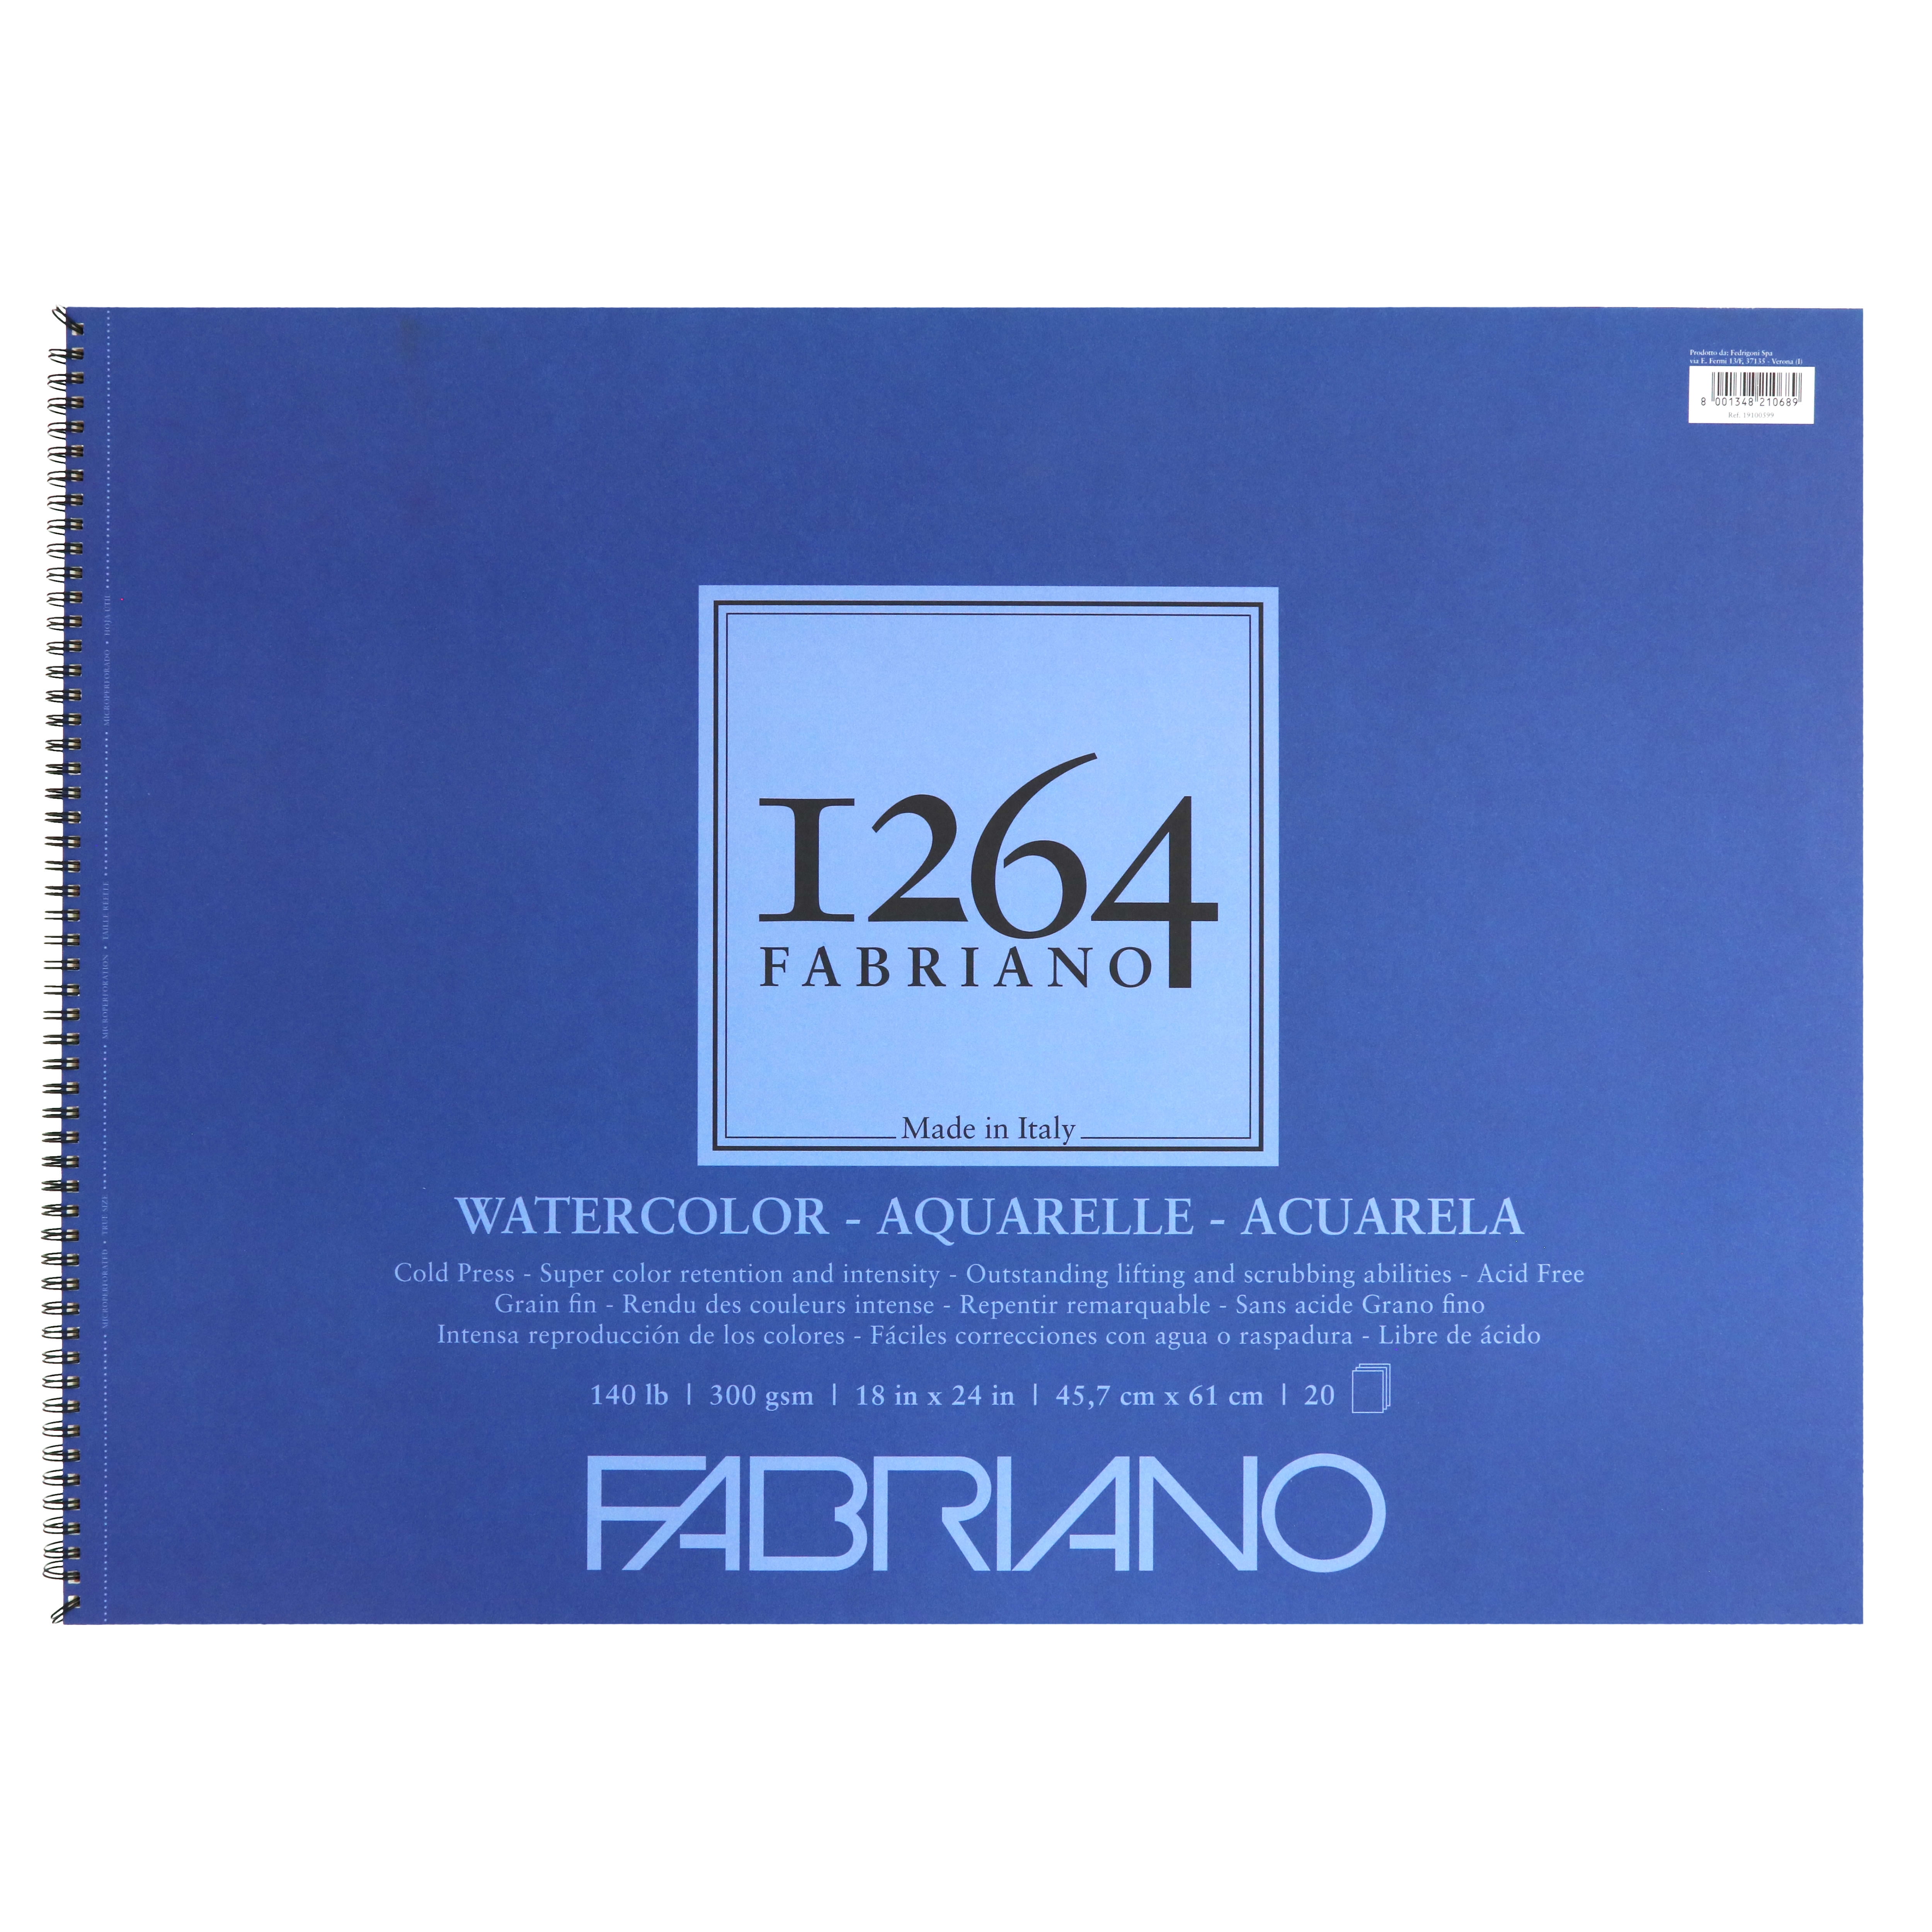 Canson Graduate Water Color Pad 250 gr , 20 Sheets - 5.8 x 8.3 (A 5)